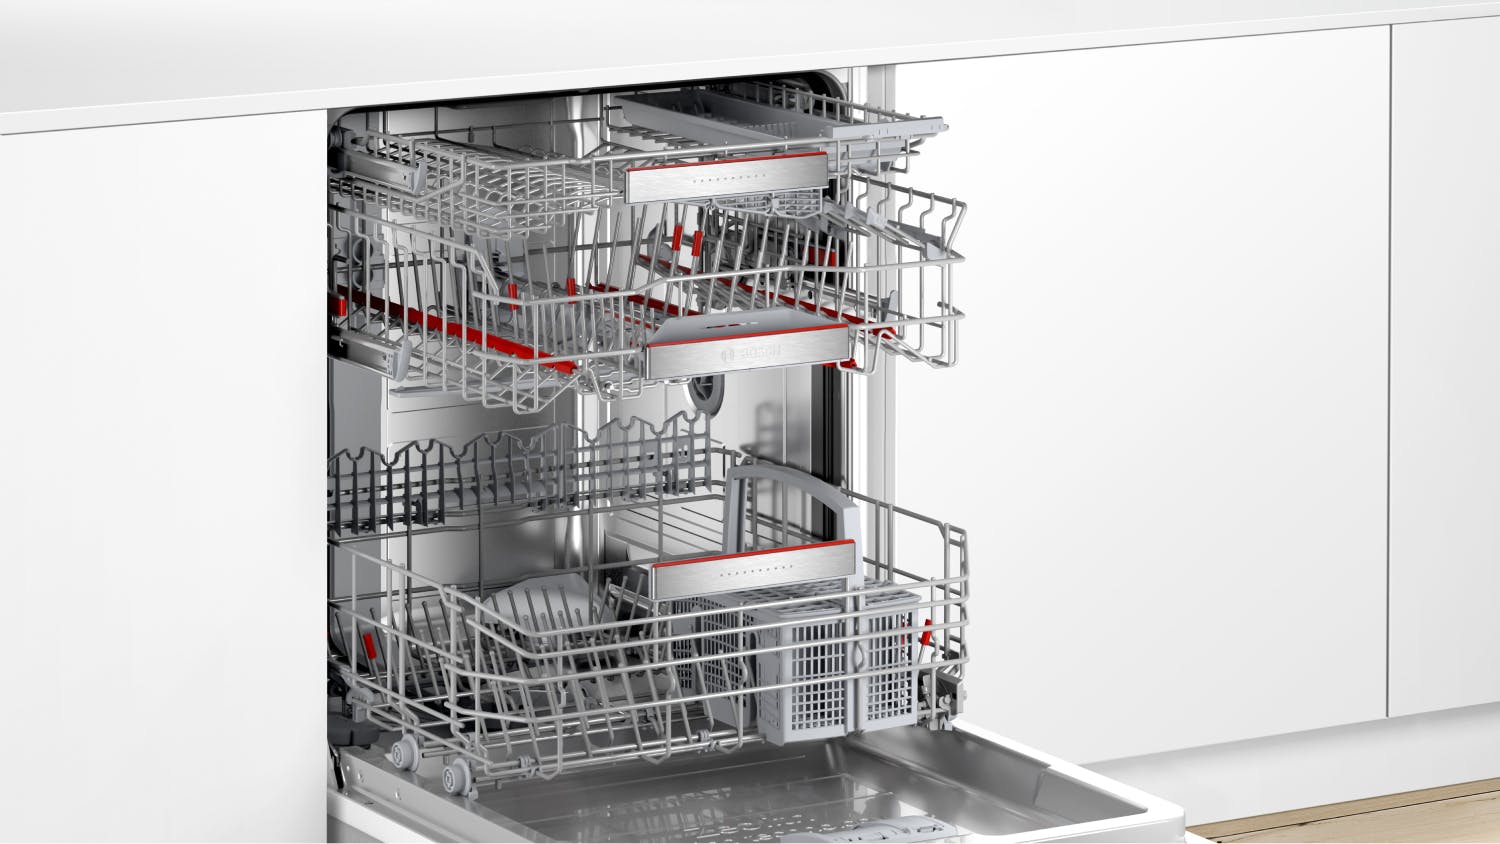 Bosch 14 Place Setting 9 Program Built-Under Dishwasher - Stainless Steel (Series 8/SMU8ZCS01A)